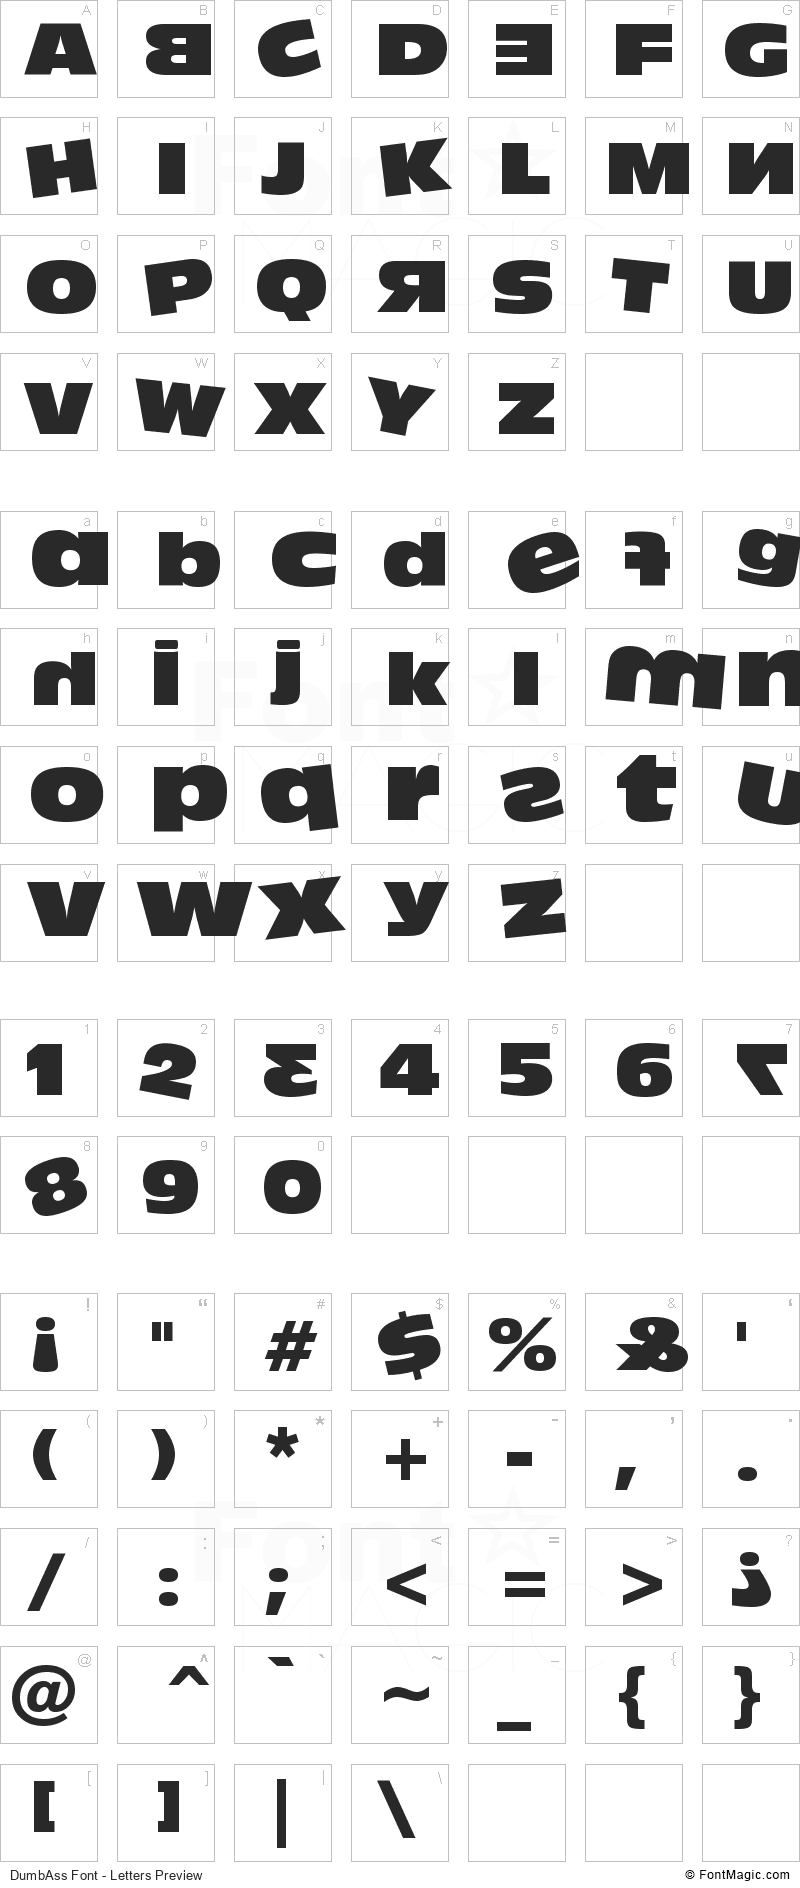 DumbAss Font - All Latters Preview Chart